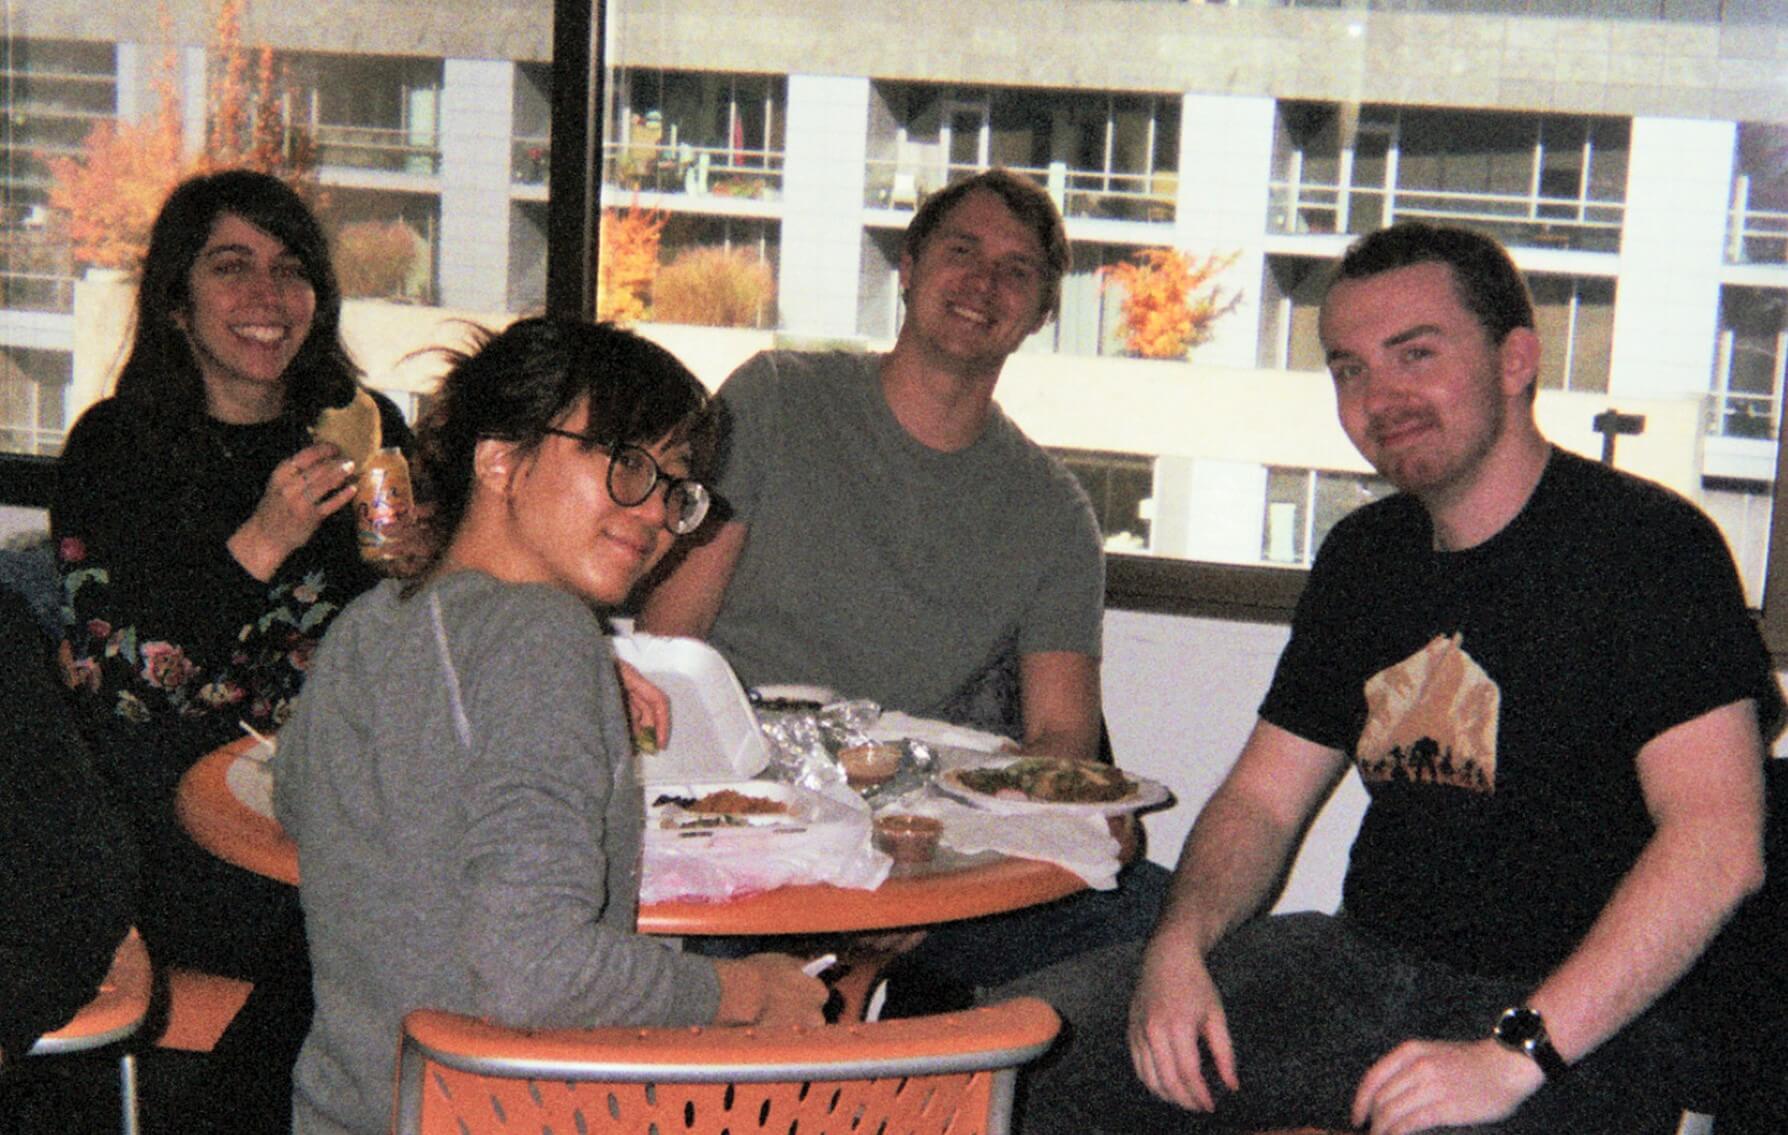 Four people eating lunch at a table.